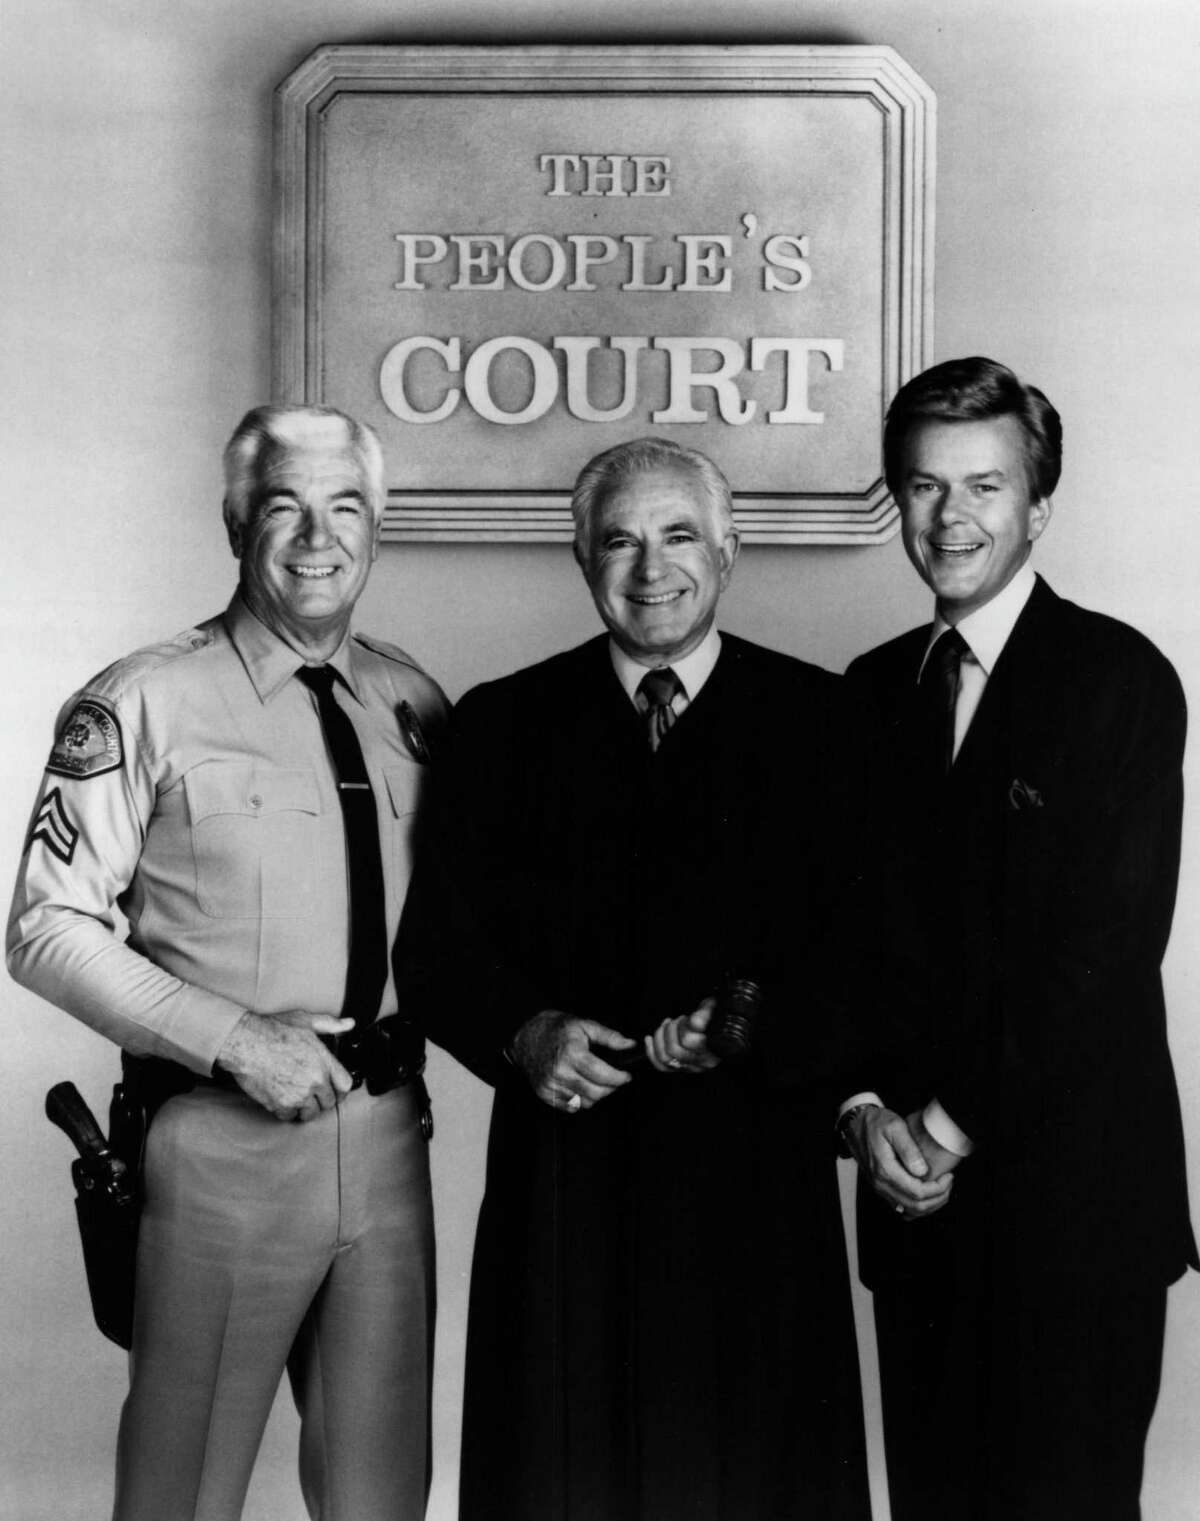 "The People's Court" cast, Rusty the bailiff, Judge Joseph Wapner and Doug Llewelyn.